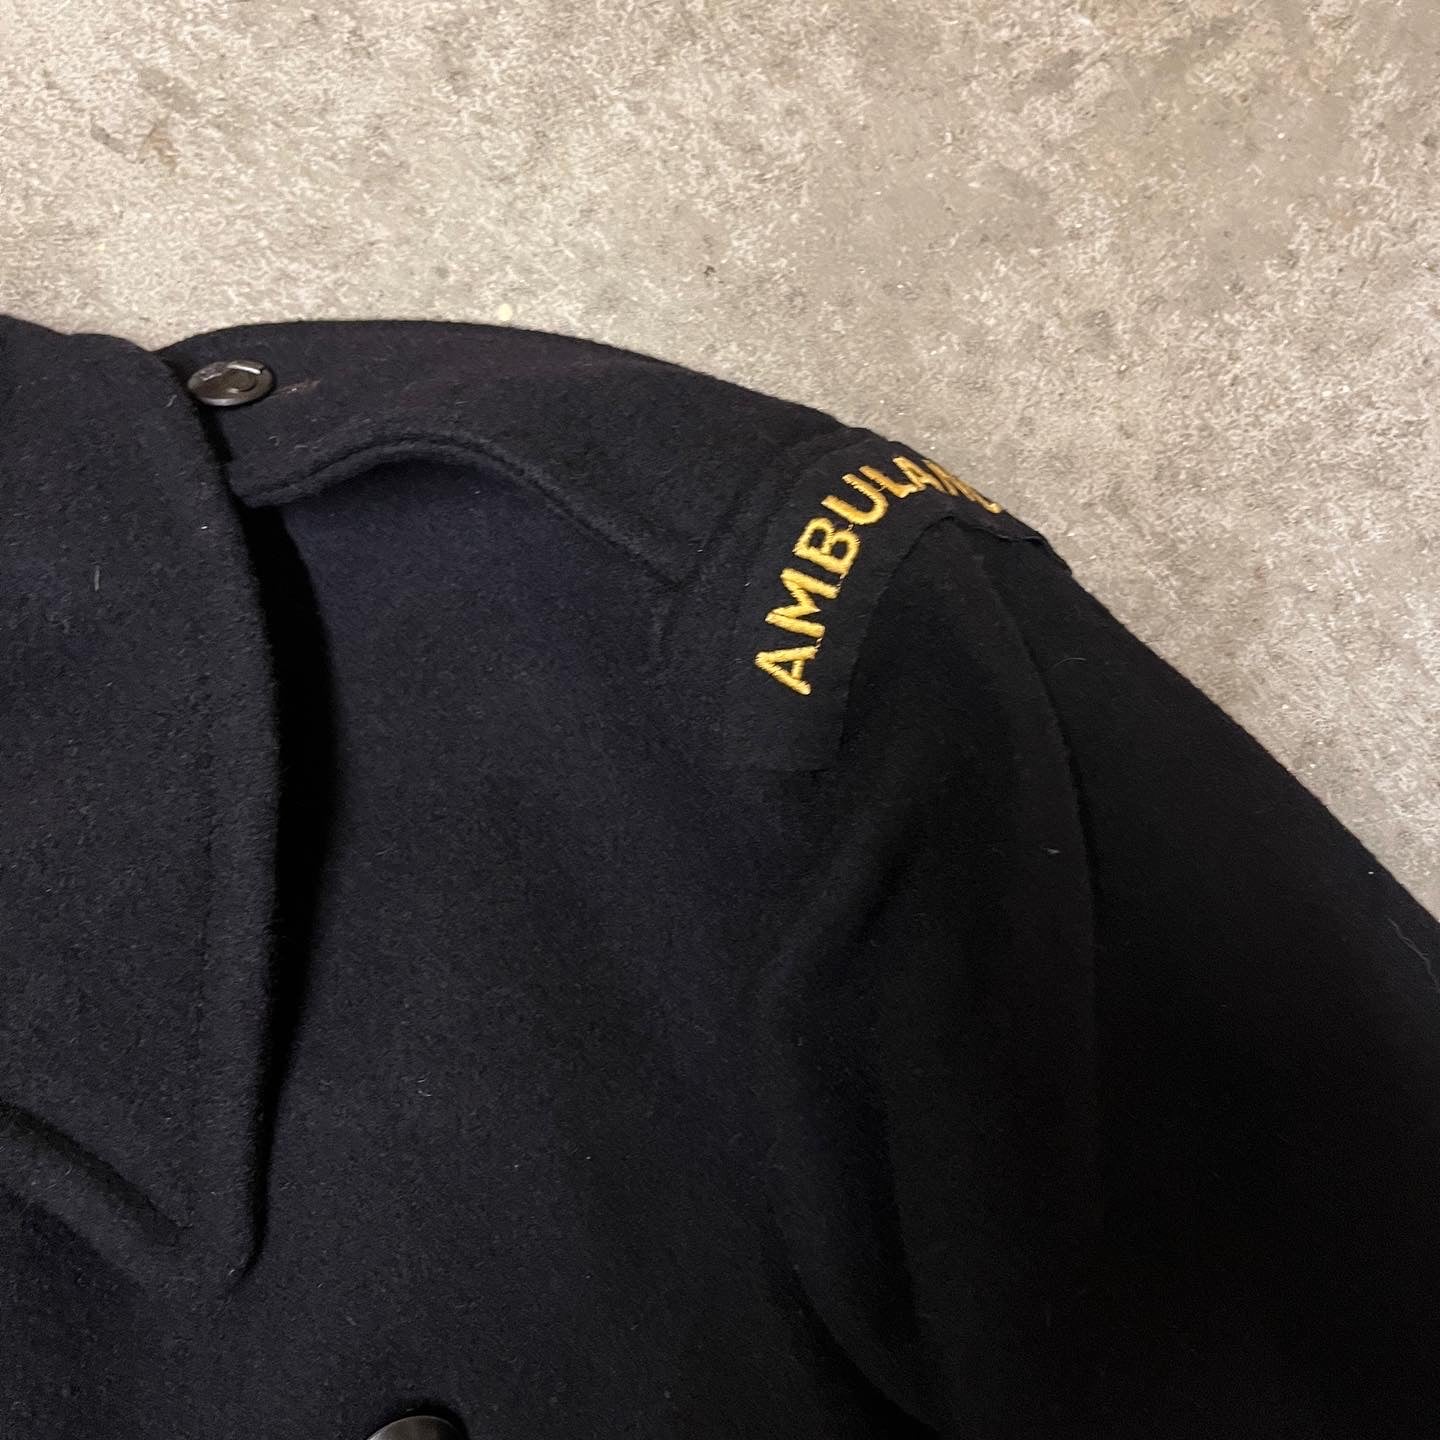 1951 Dated Civil Defence Greatcoat